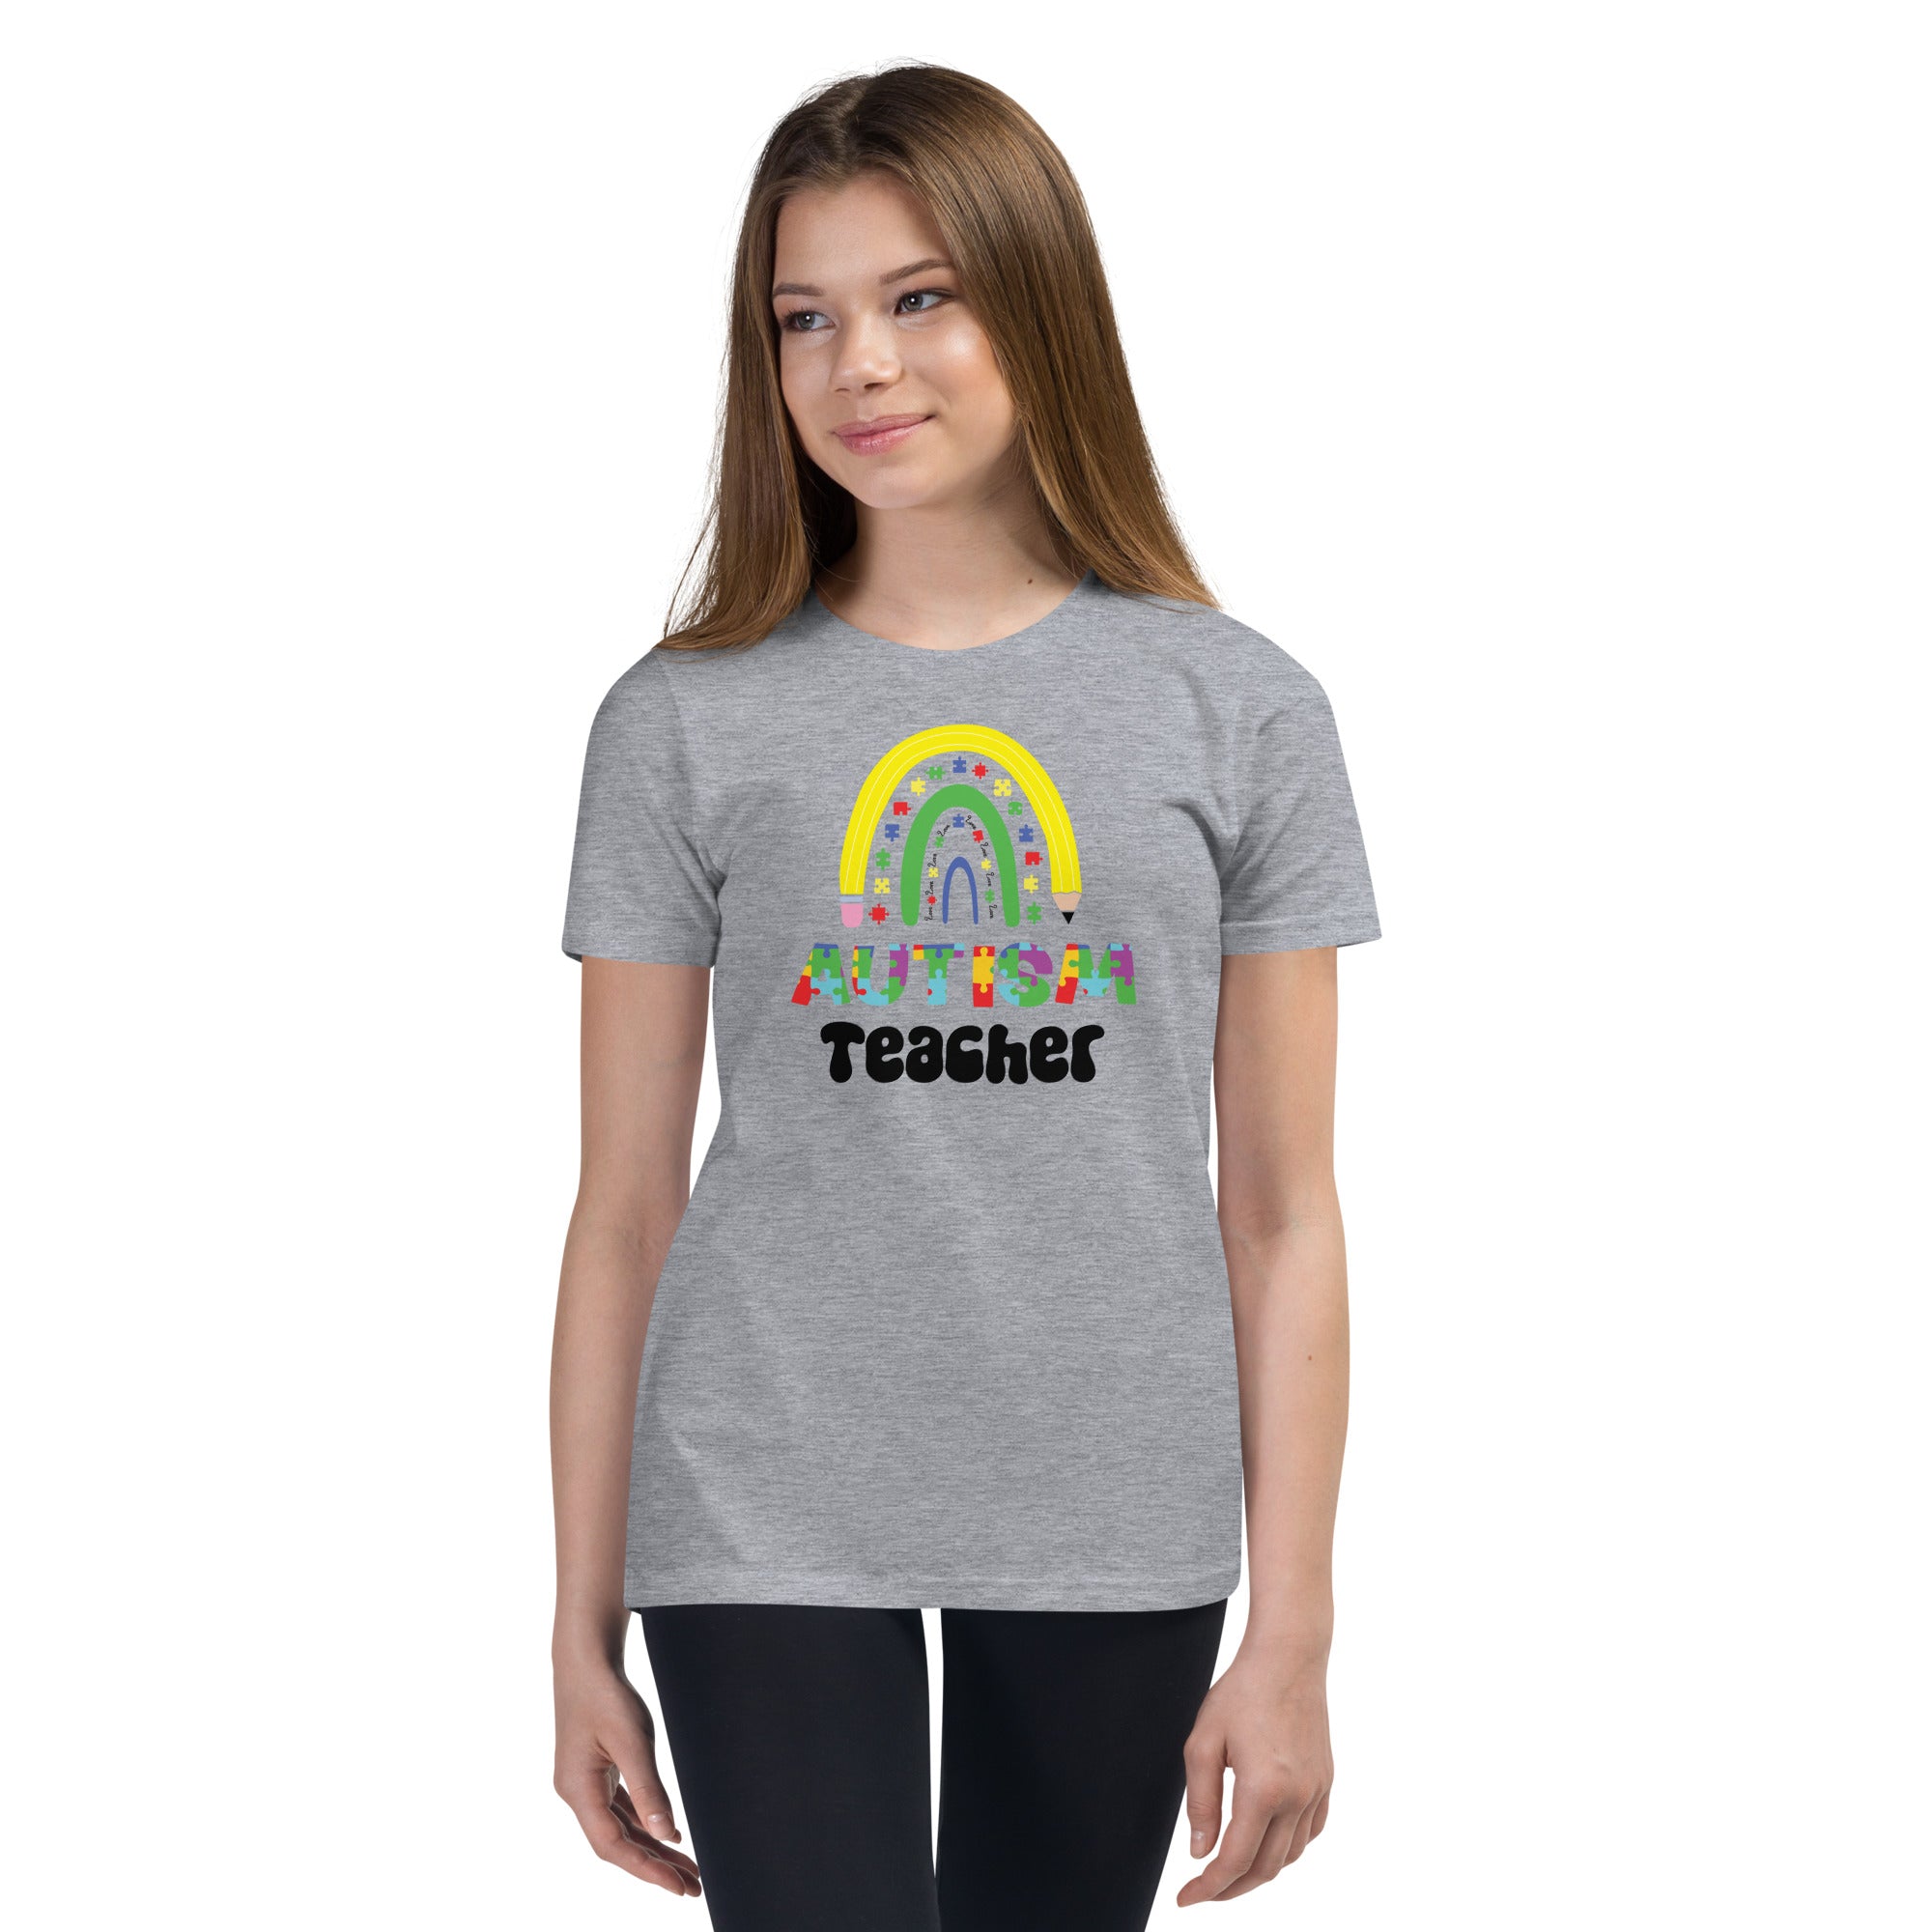 Autism Teacher Youth Graphic Tees